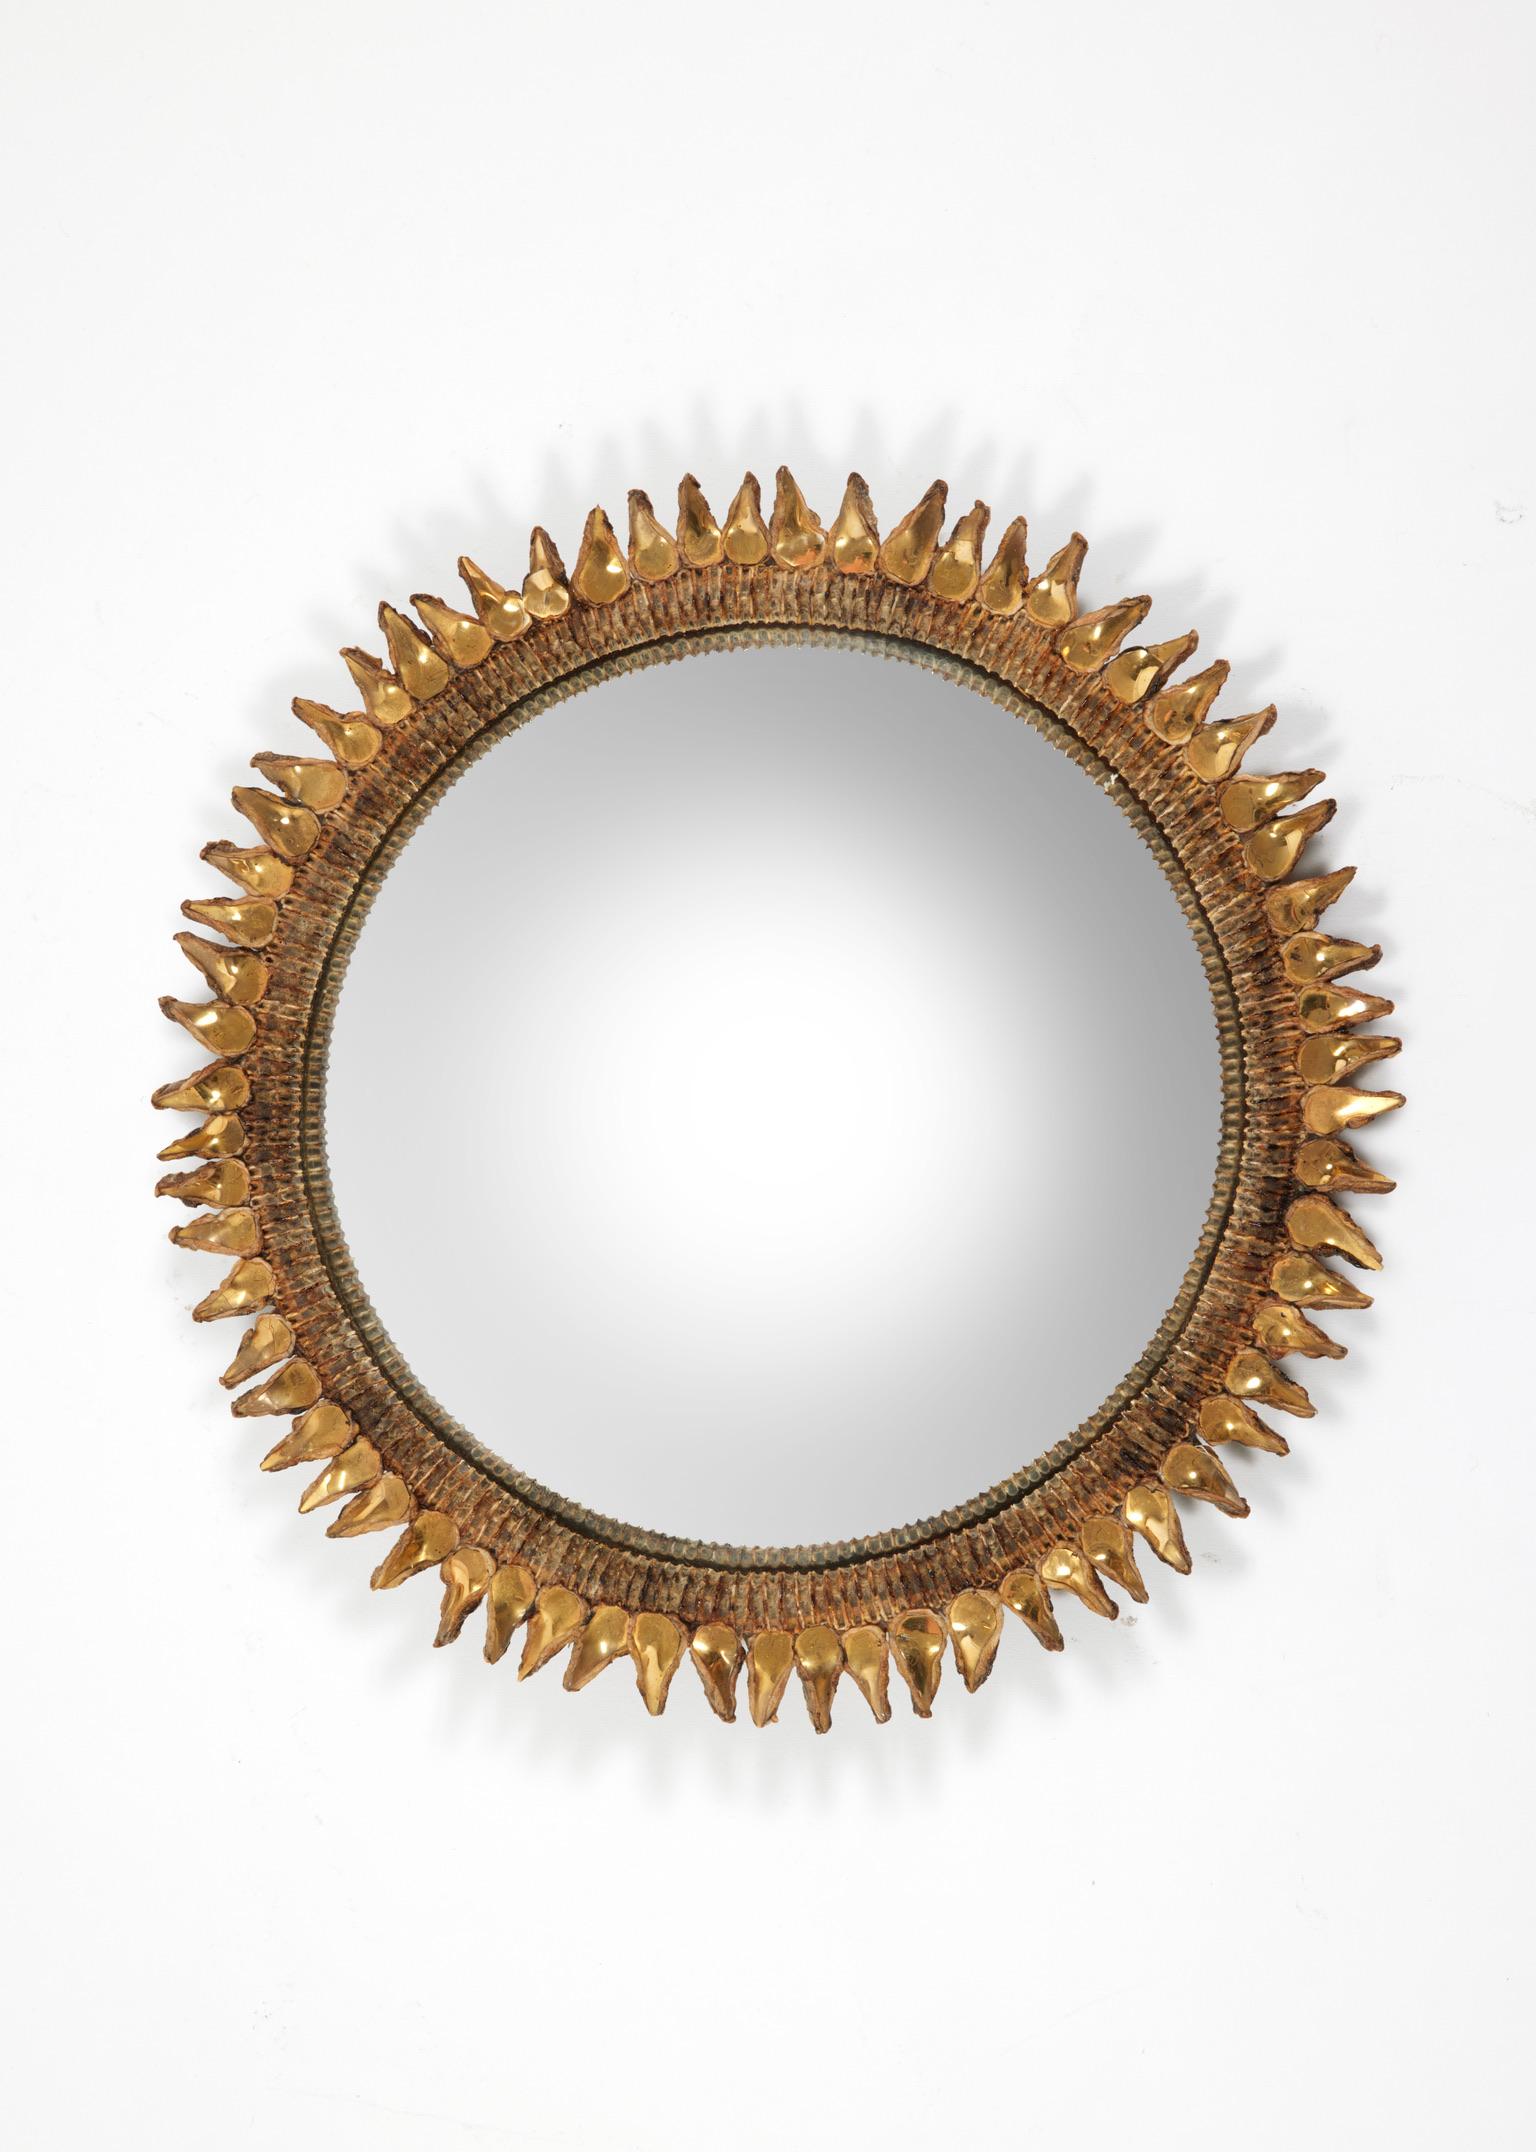 Circular convex mirror in beige talosel and gold mirror.
Signed Line VAUTRIN on the back.